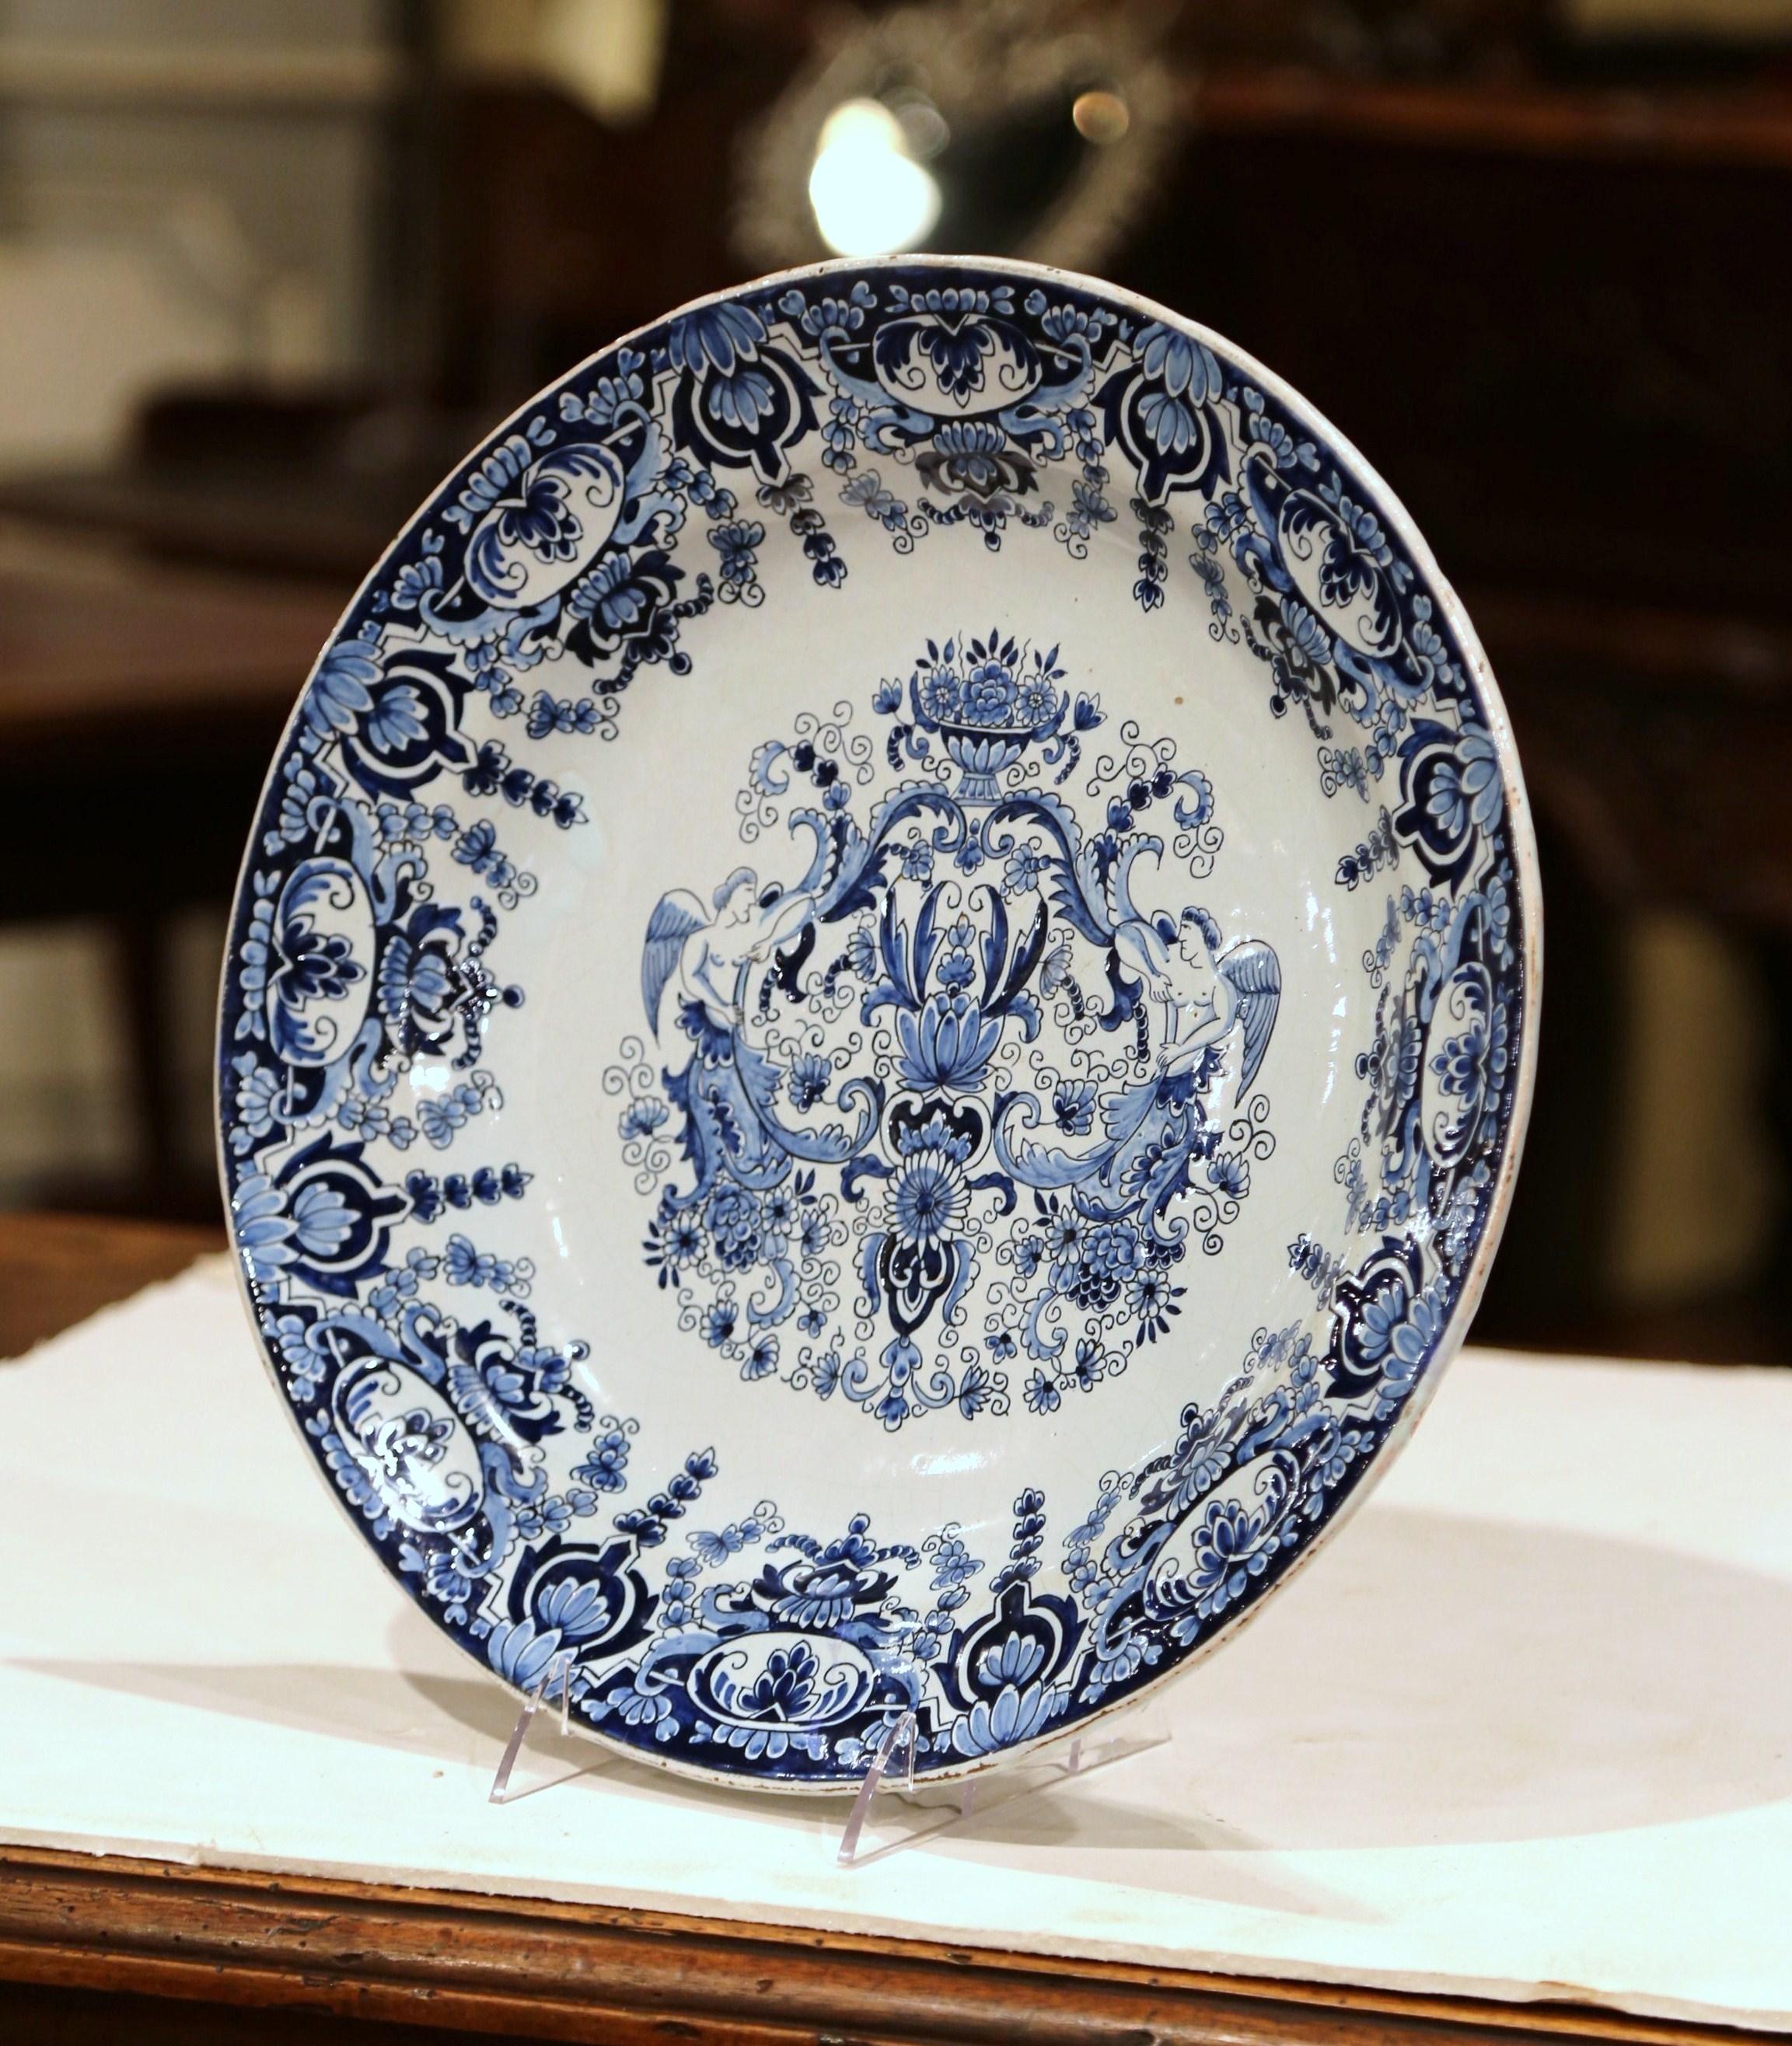 Decorate a wall or a shelf with this elegant, antique ceramic platter. Created in Bourges, France circa 1870, the ornate wall plate features hand painted blue and white floral motifs. The large ceramic plate is decorated with a center crest flanked